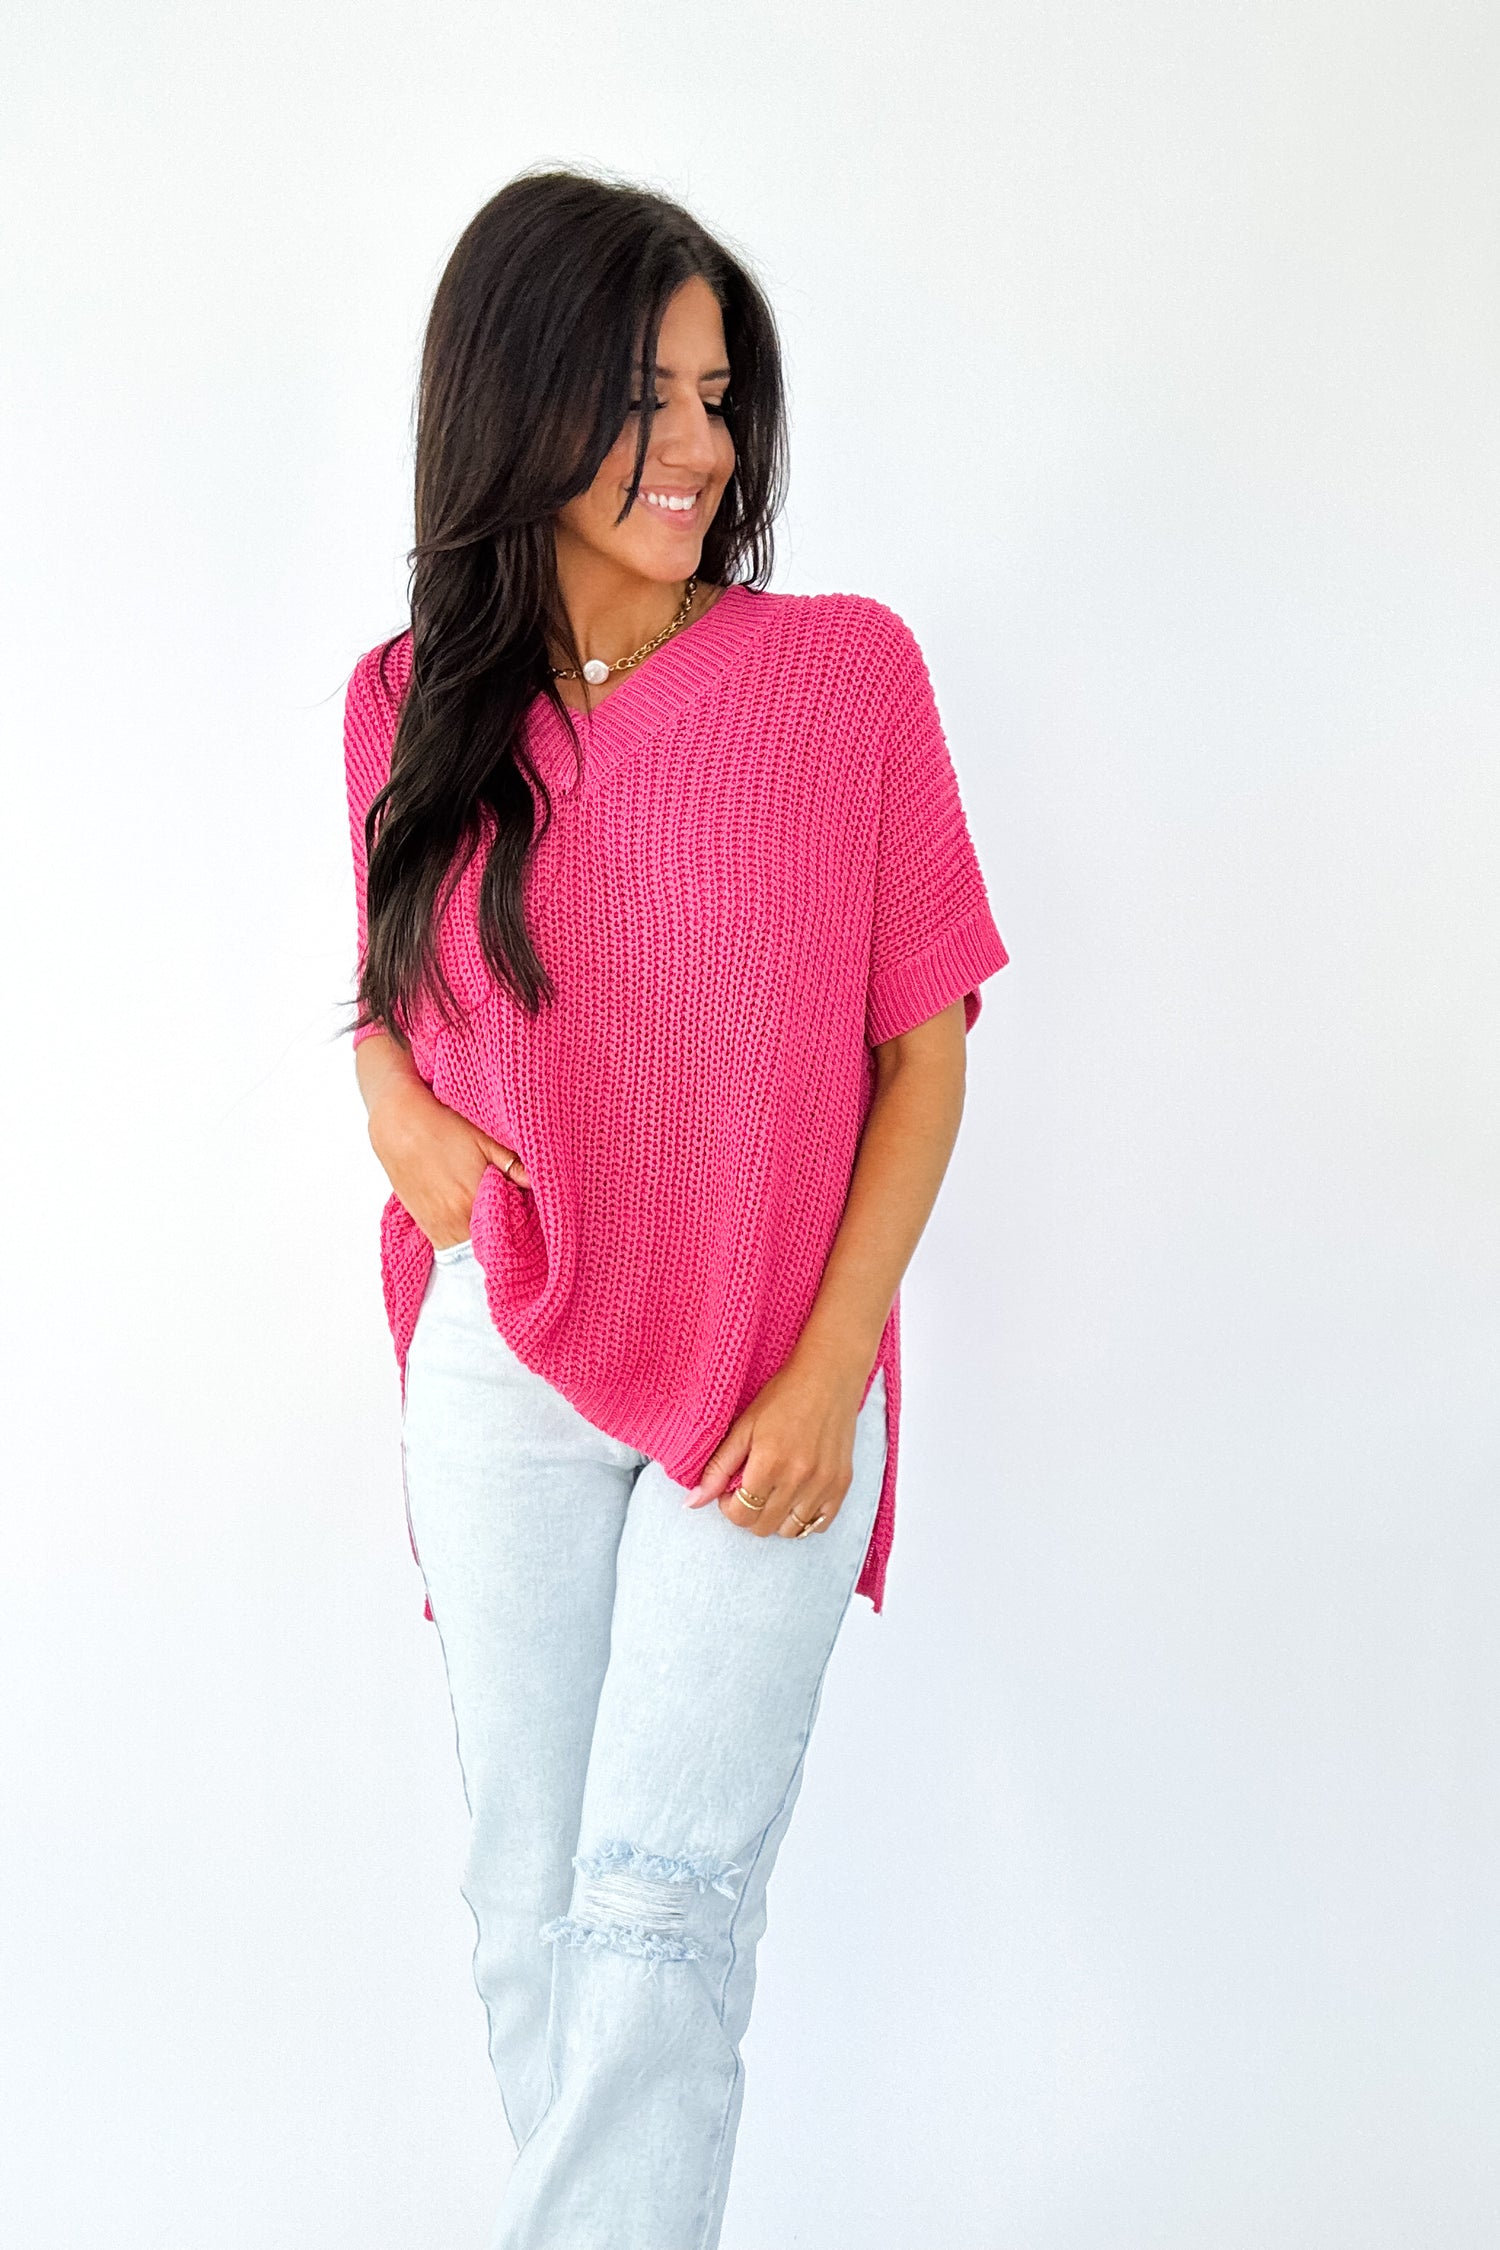 FOR KEEPS SWEATER KNIT SHORT SLEEVE TOP IN PINK